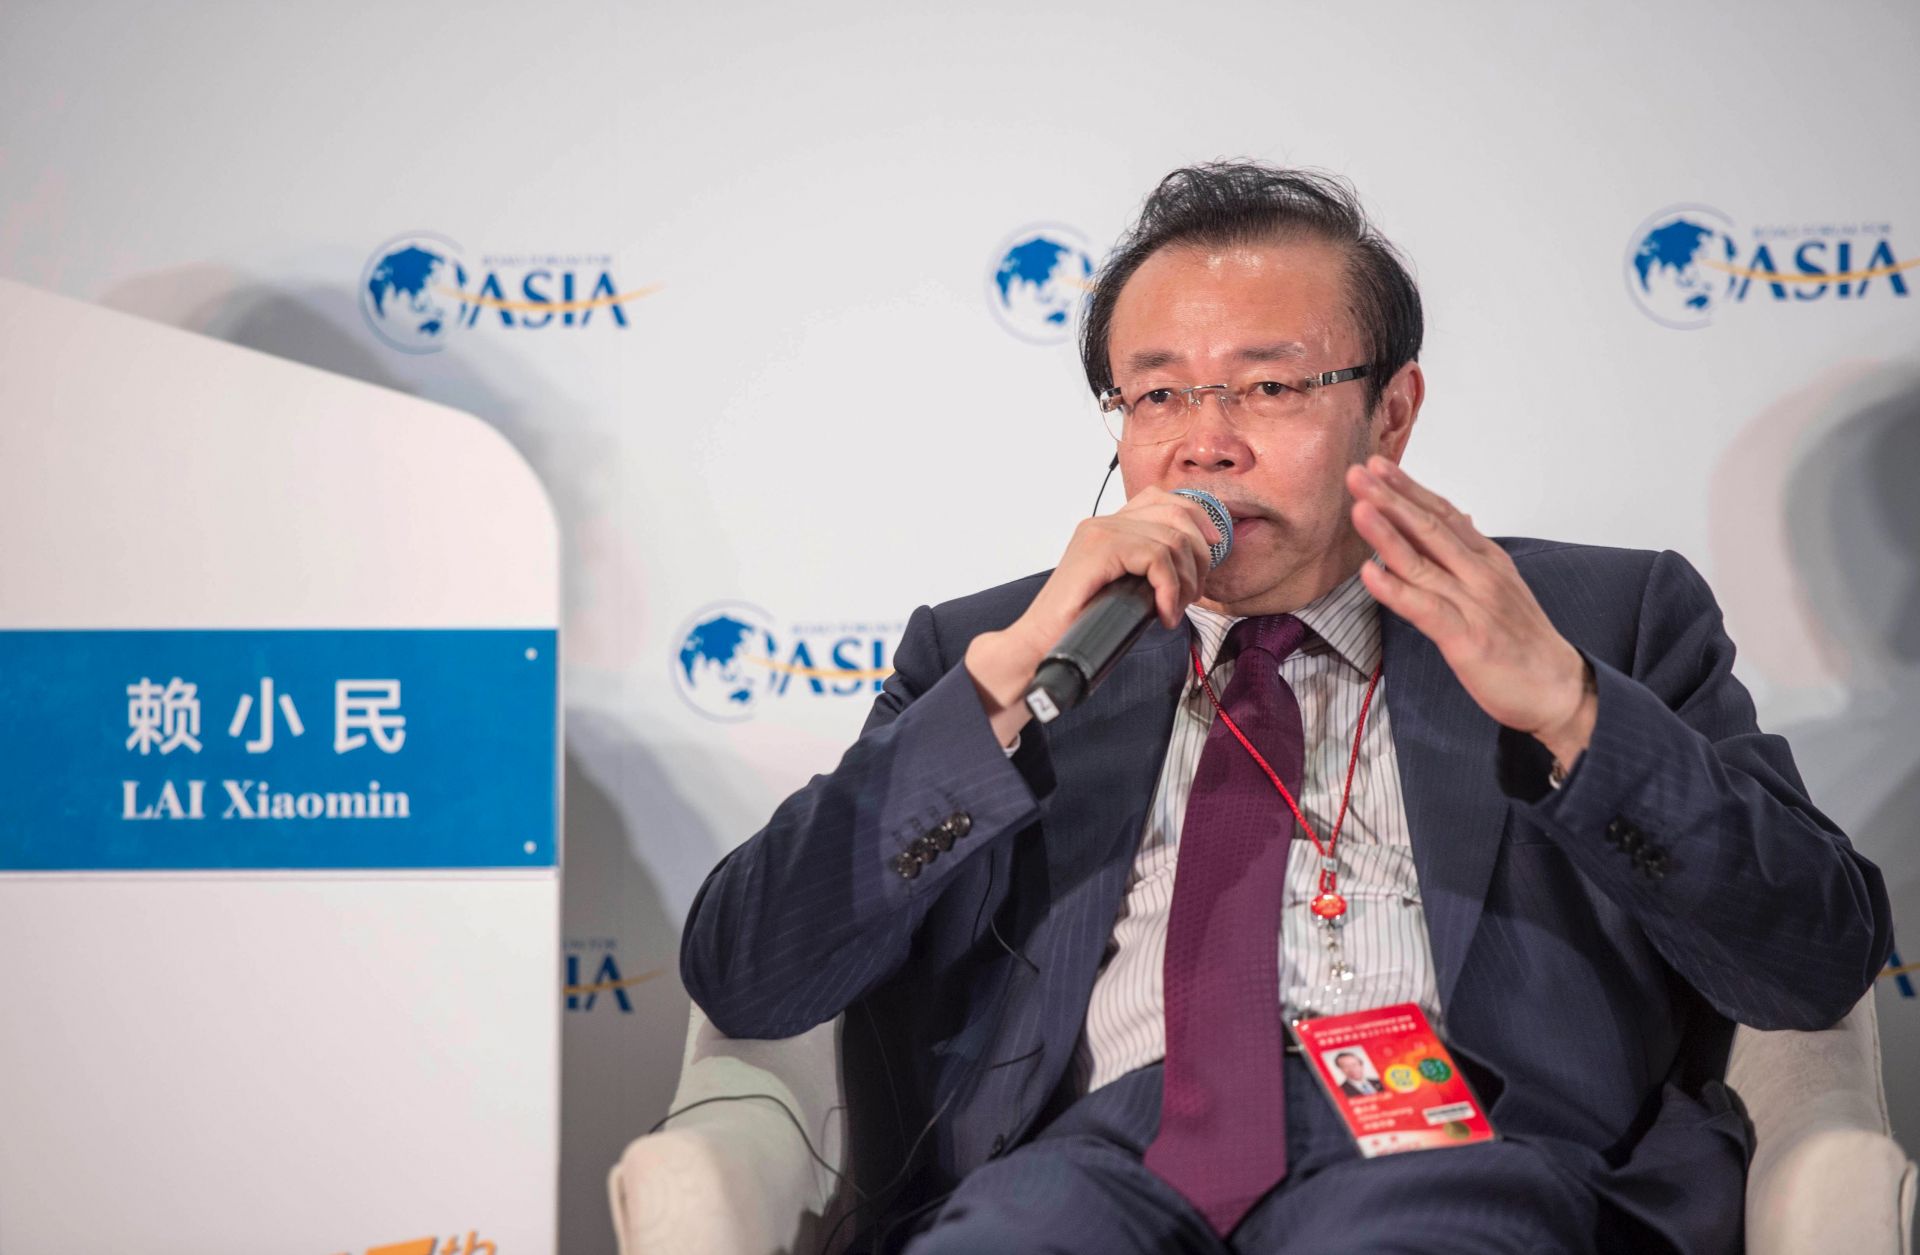 Lai Xiaomin, then-chairman of Huarong Asset Management Co., speaks during a conference in China in 2016. Lai was executed in January 2021 following his conviction on bribery charges.